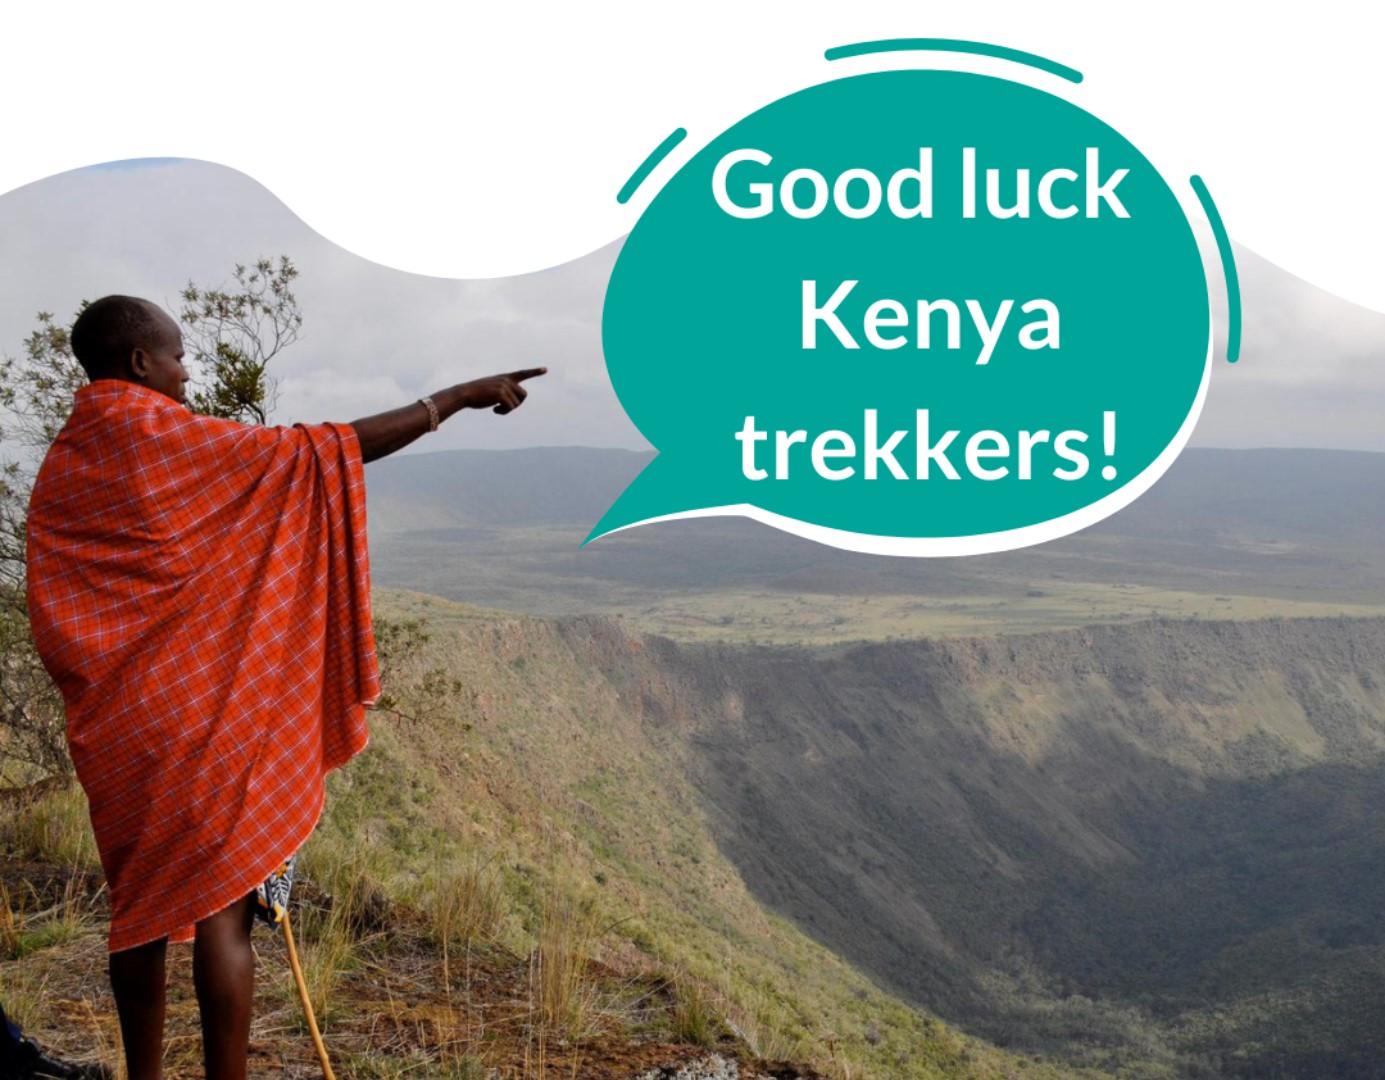 Lady stood on mountain pointing to speech bubble saying 'Good Luck Kenya Trekkers!'